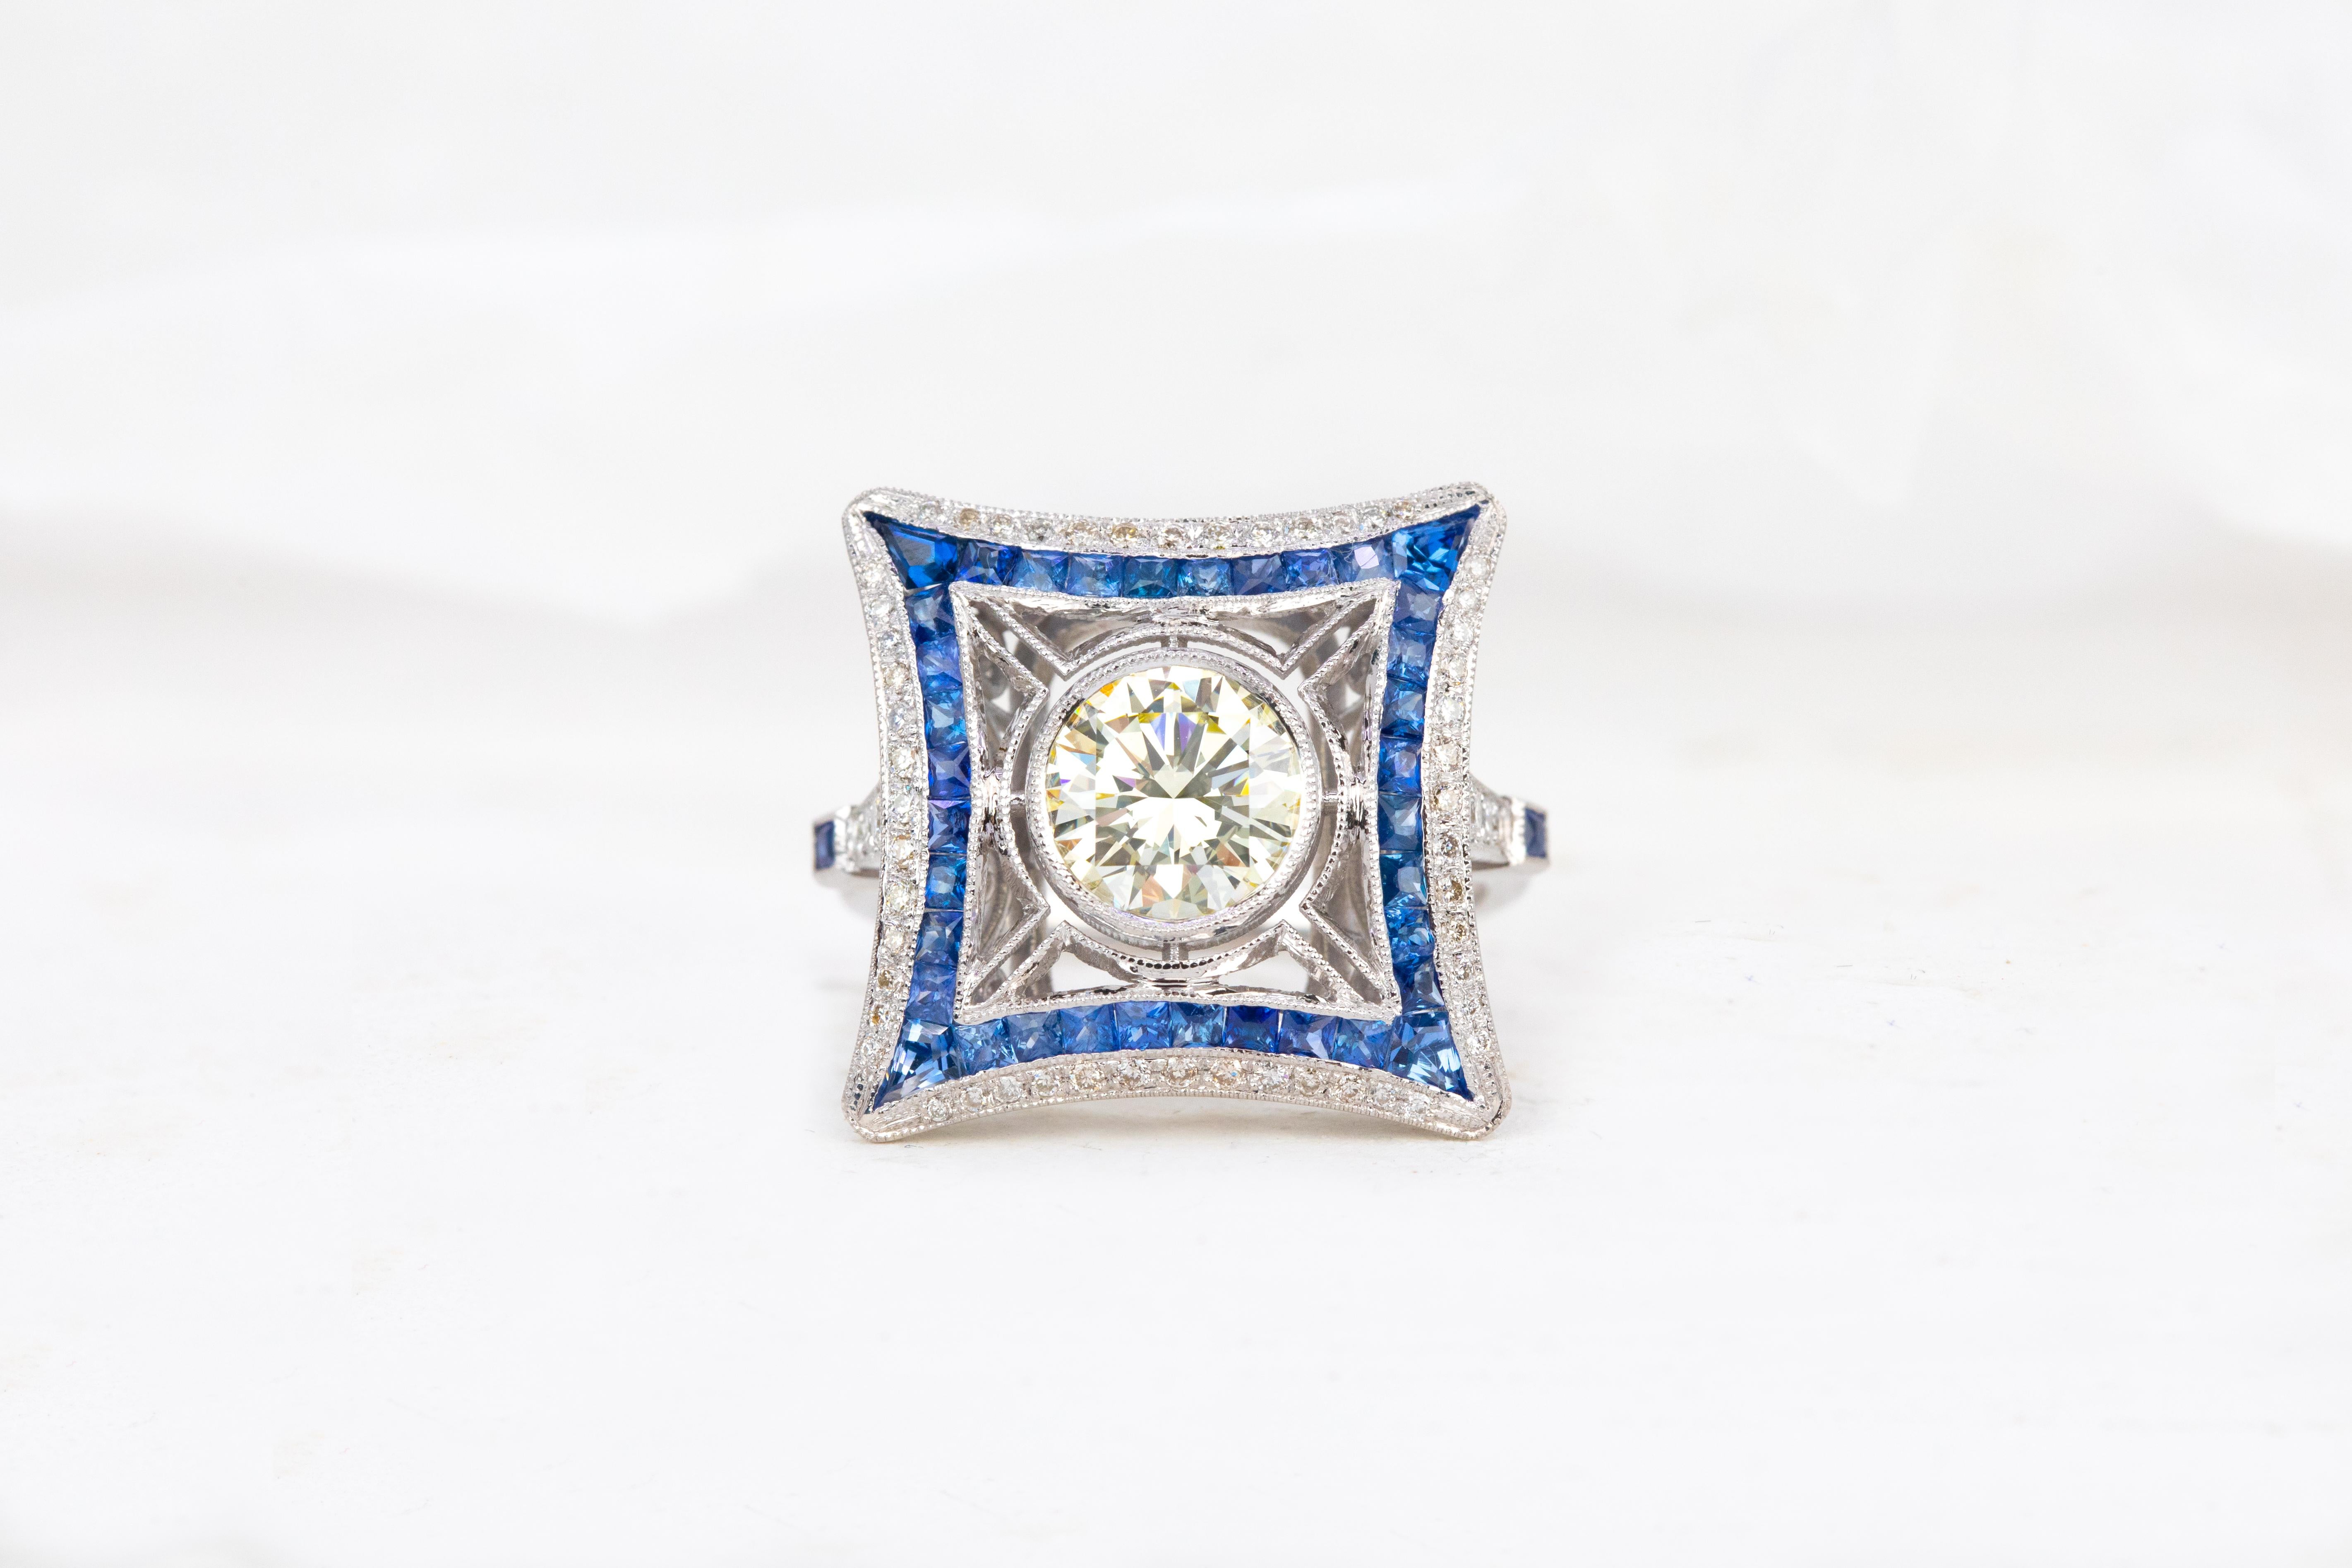 18K Gold Art Deco 1.28 ct. Diamond and Sapphire Cocktail Ring

This ring was made with quality materials and excellent handwork. I guarantee the quality assurance of my handwork and materials. It is vital for me that you are totally happy with your